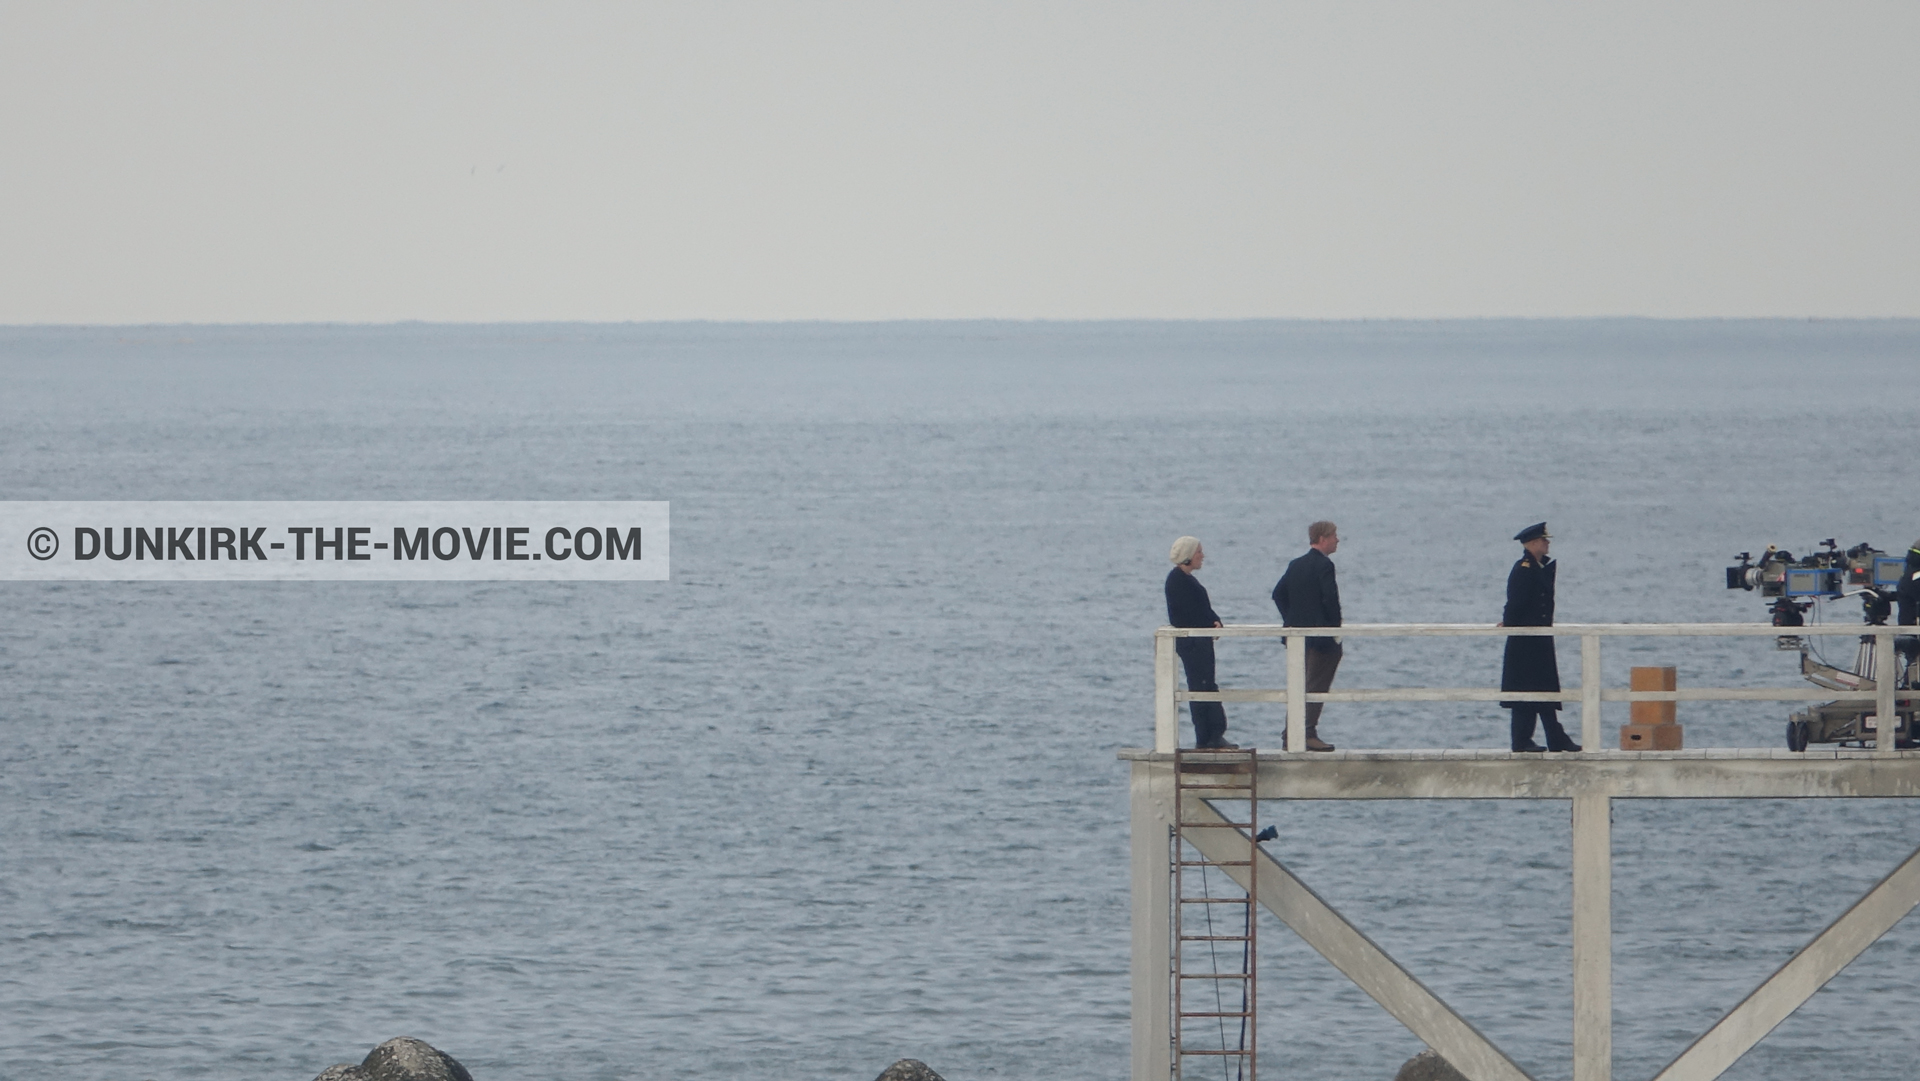 Picture with actor, IMAX camera, EST pier, Christopher Nolan, Emma Thomas,  from behind the scene of the Dunkirk movie by Nolan